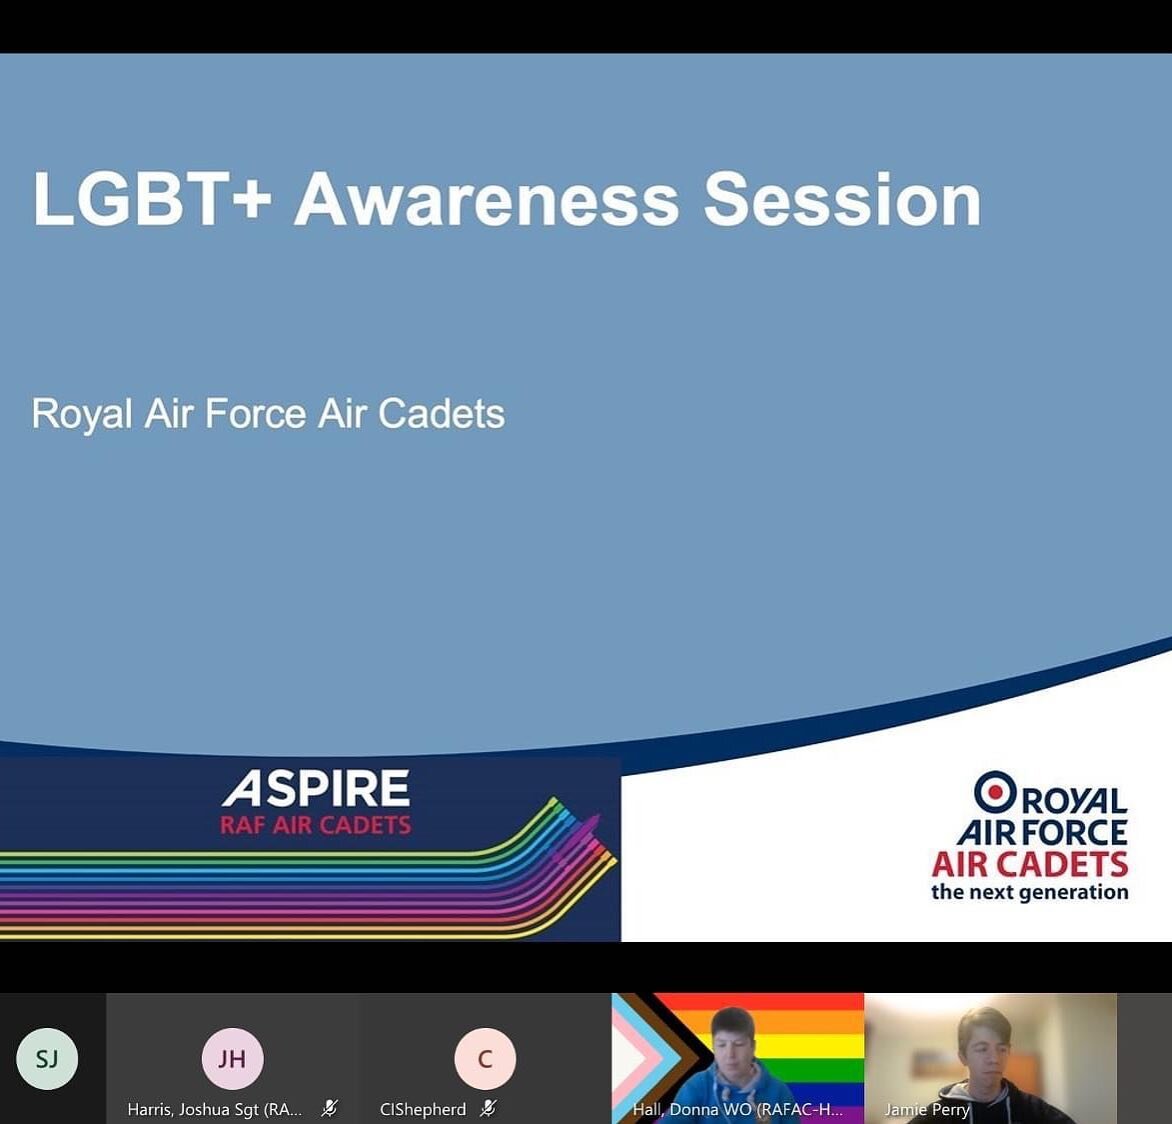 Huge thanks to @rwo.ww and Cdt Sgt Perry of @kentaircadets for delivering this evening's LGBT+ Awareness Session - great to have you both for such a professionally delivered and informative workshop! 🏳️&zwj;🌈🎉

👀 The take-home message is &quot;do